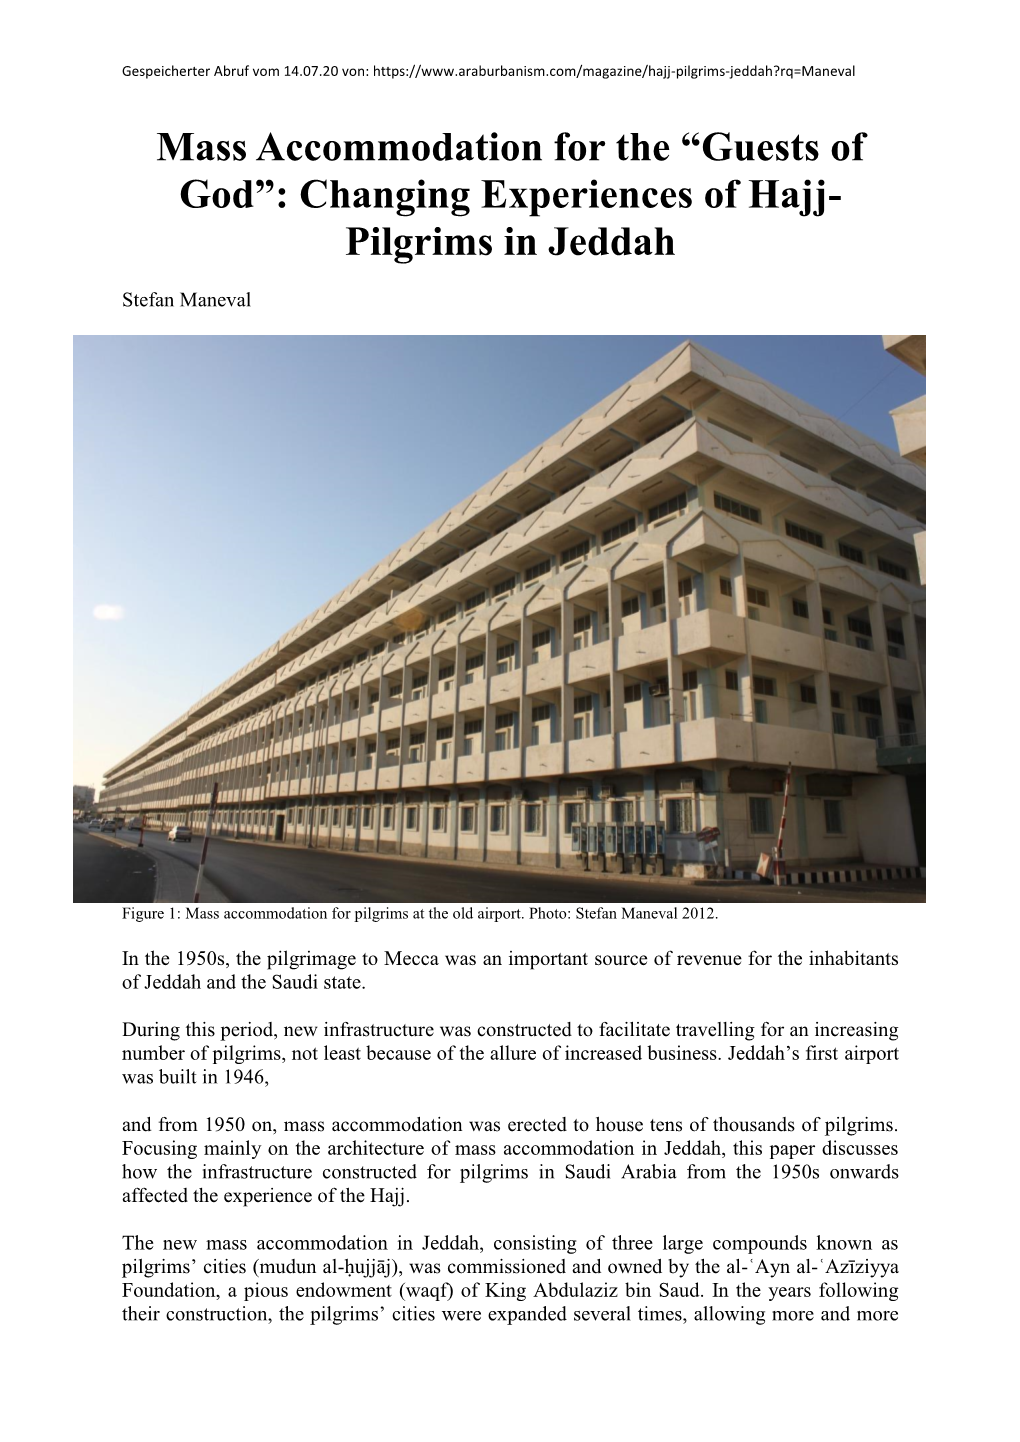 Mass Accommodation for the “Guests of God”: Changing Experiences of Hajj- Pilgrims in Jeddah